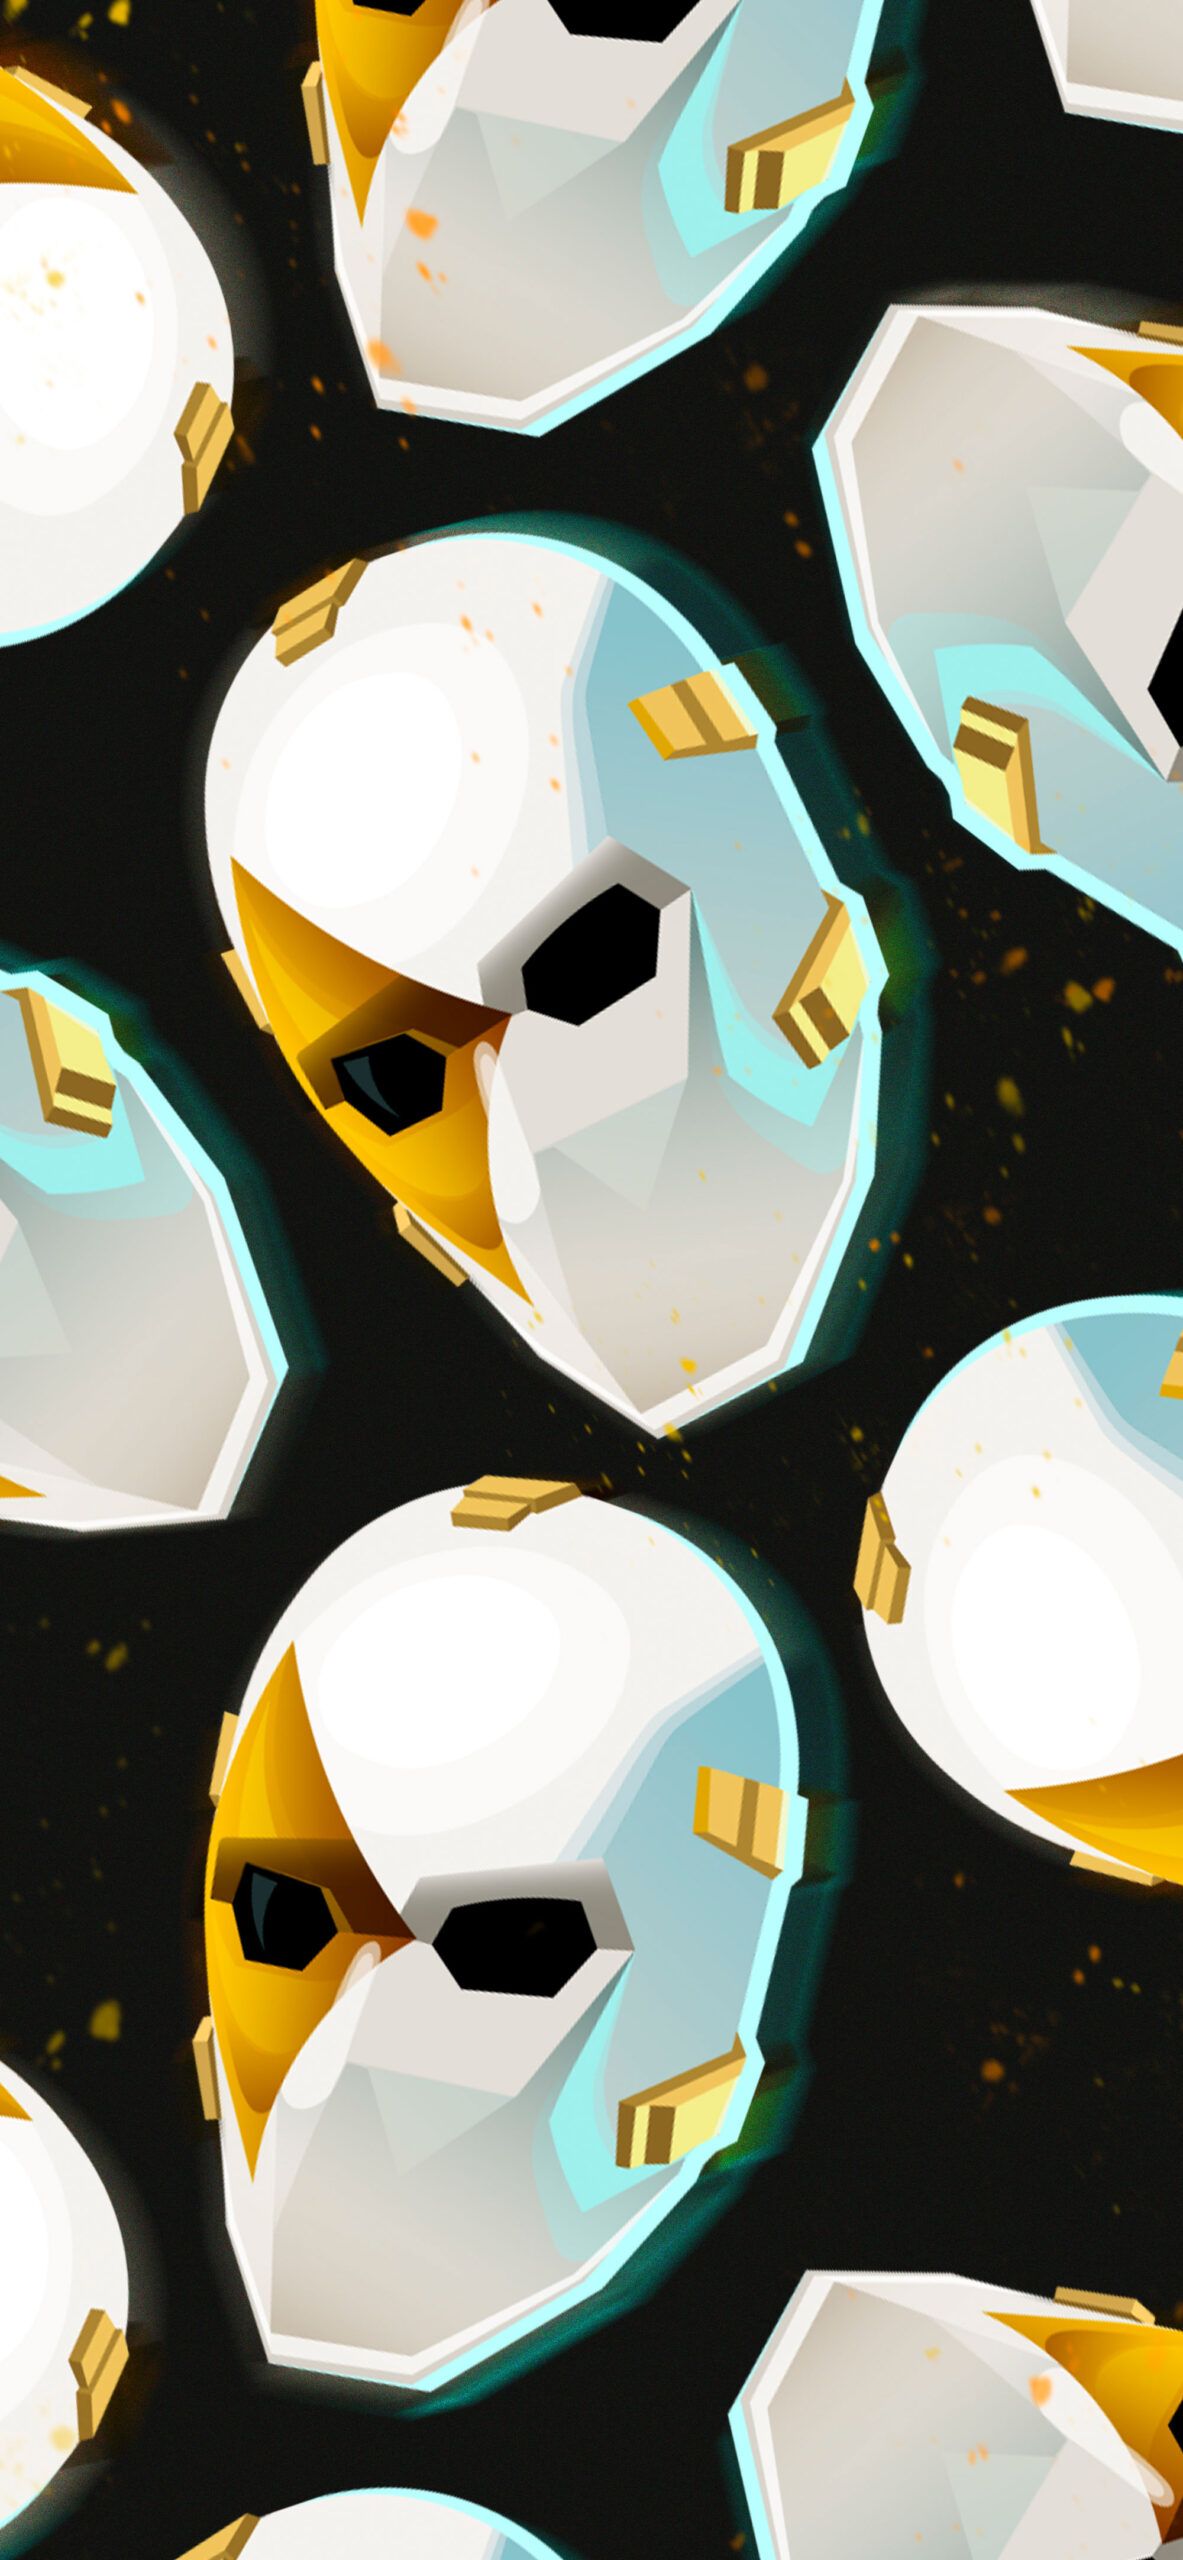 A pattern of white and gold masks - Fortnite